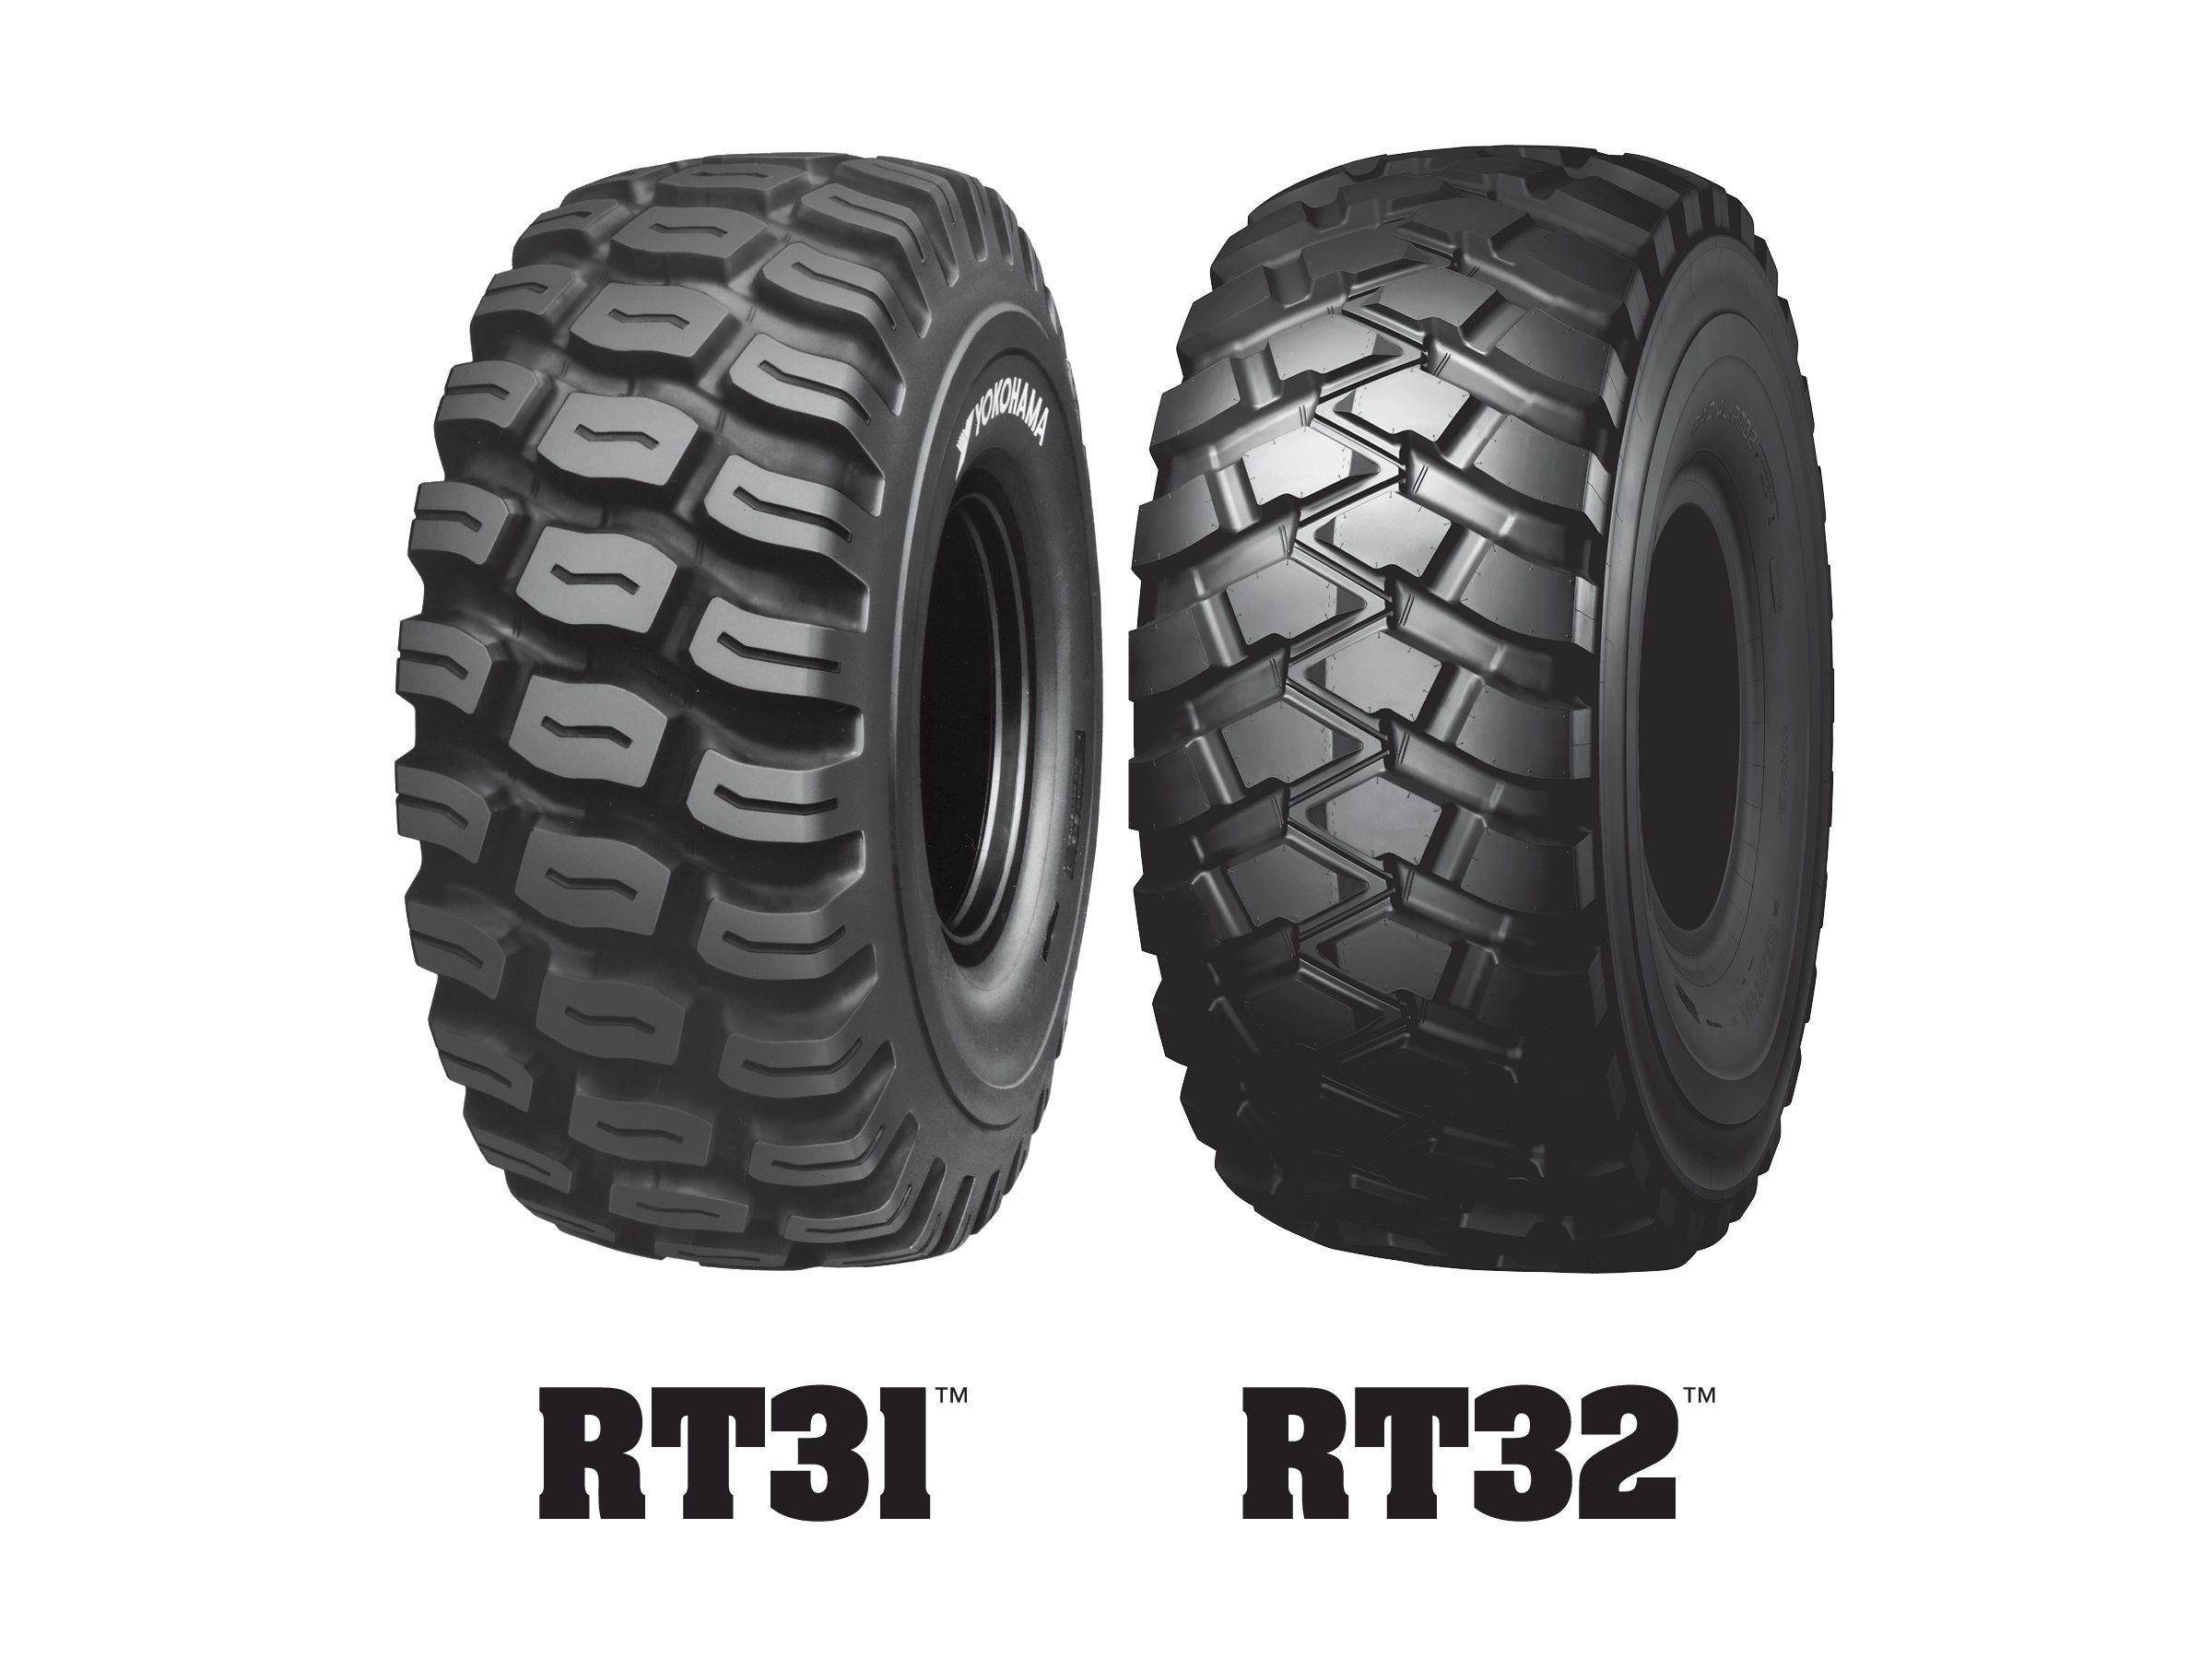 Yokohama Tire’s New RT31™/RT32™ E-3 Radial Tires Provide Long-lasting Traction and Durability for Scrapers